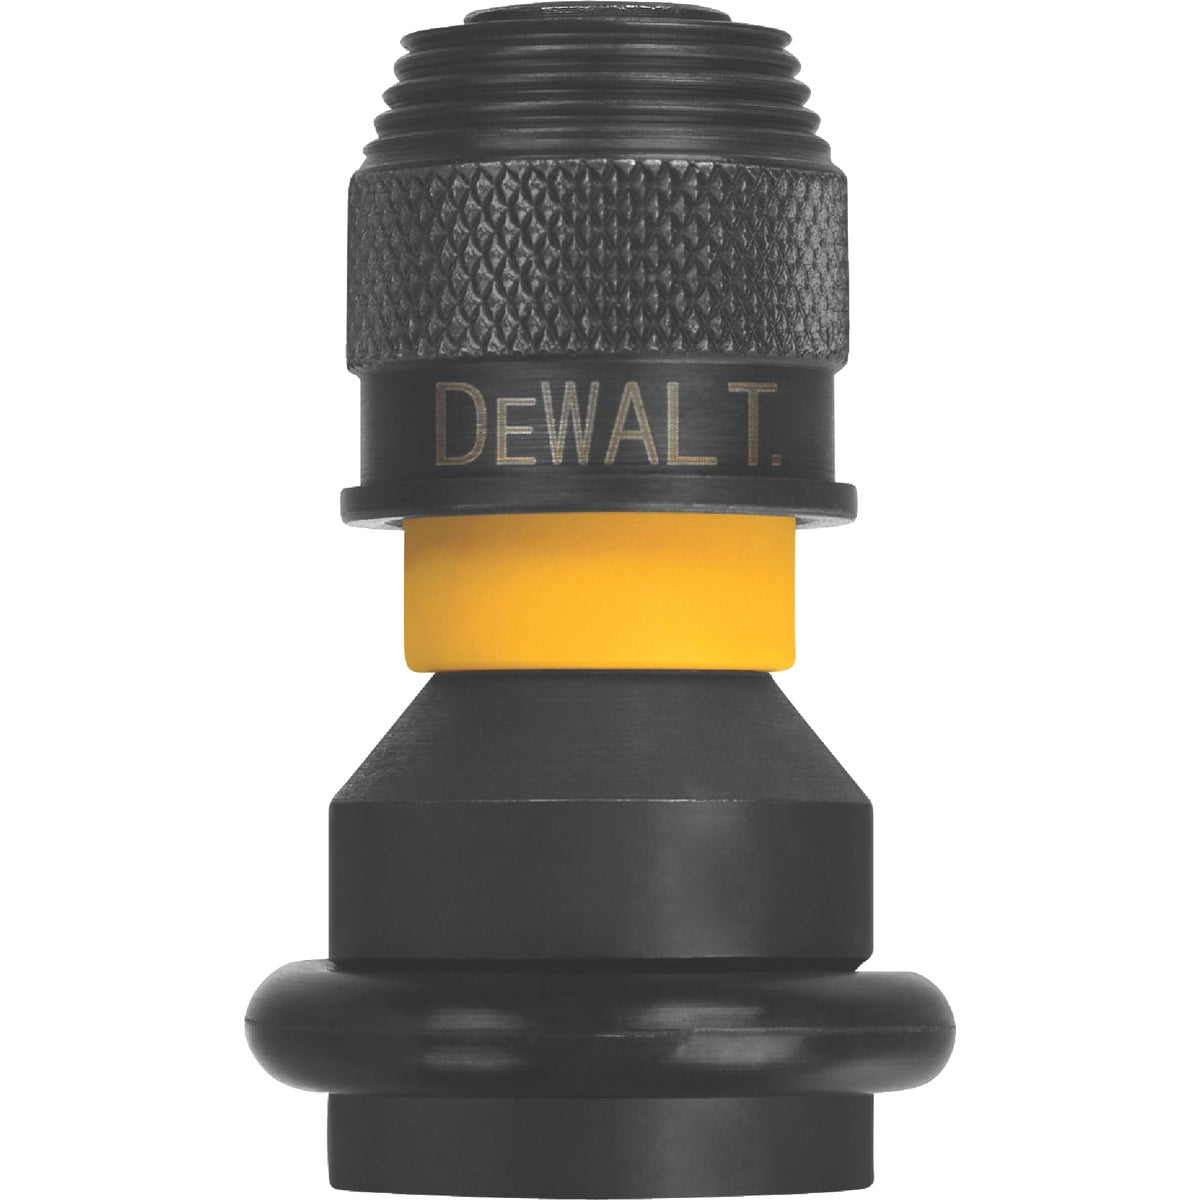 DEWALT 1/2 In. Square to 3 In. Hex Drive Adapter